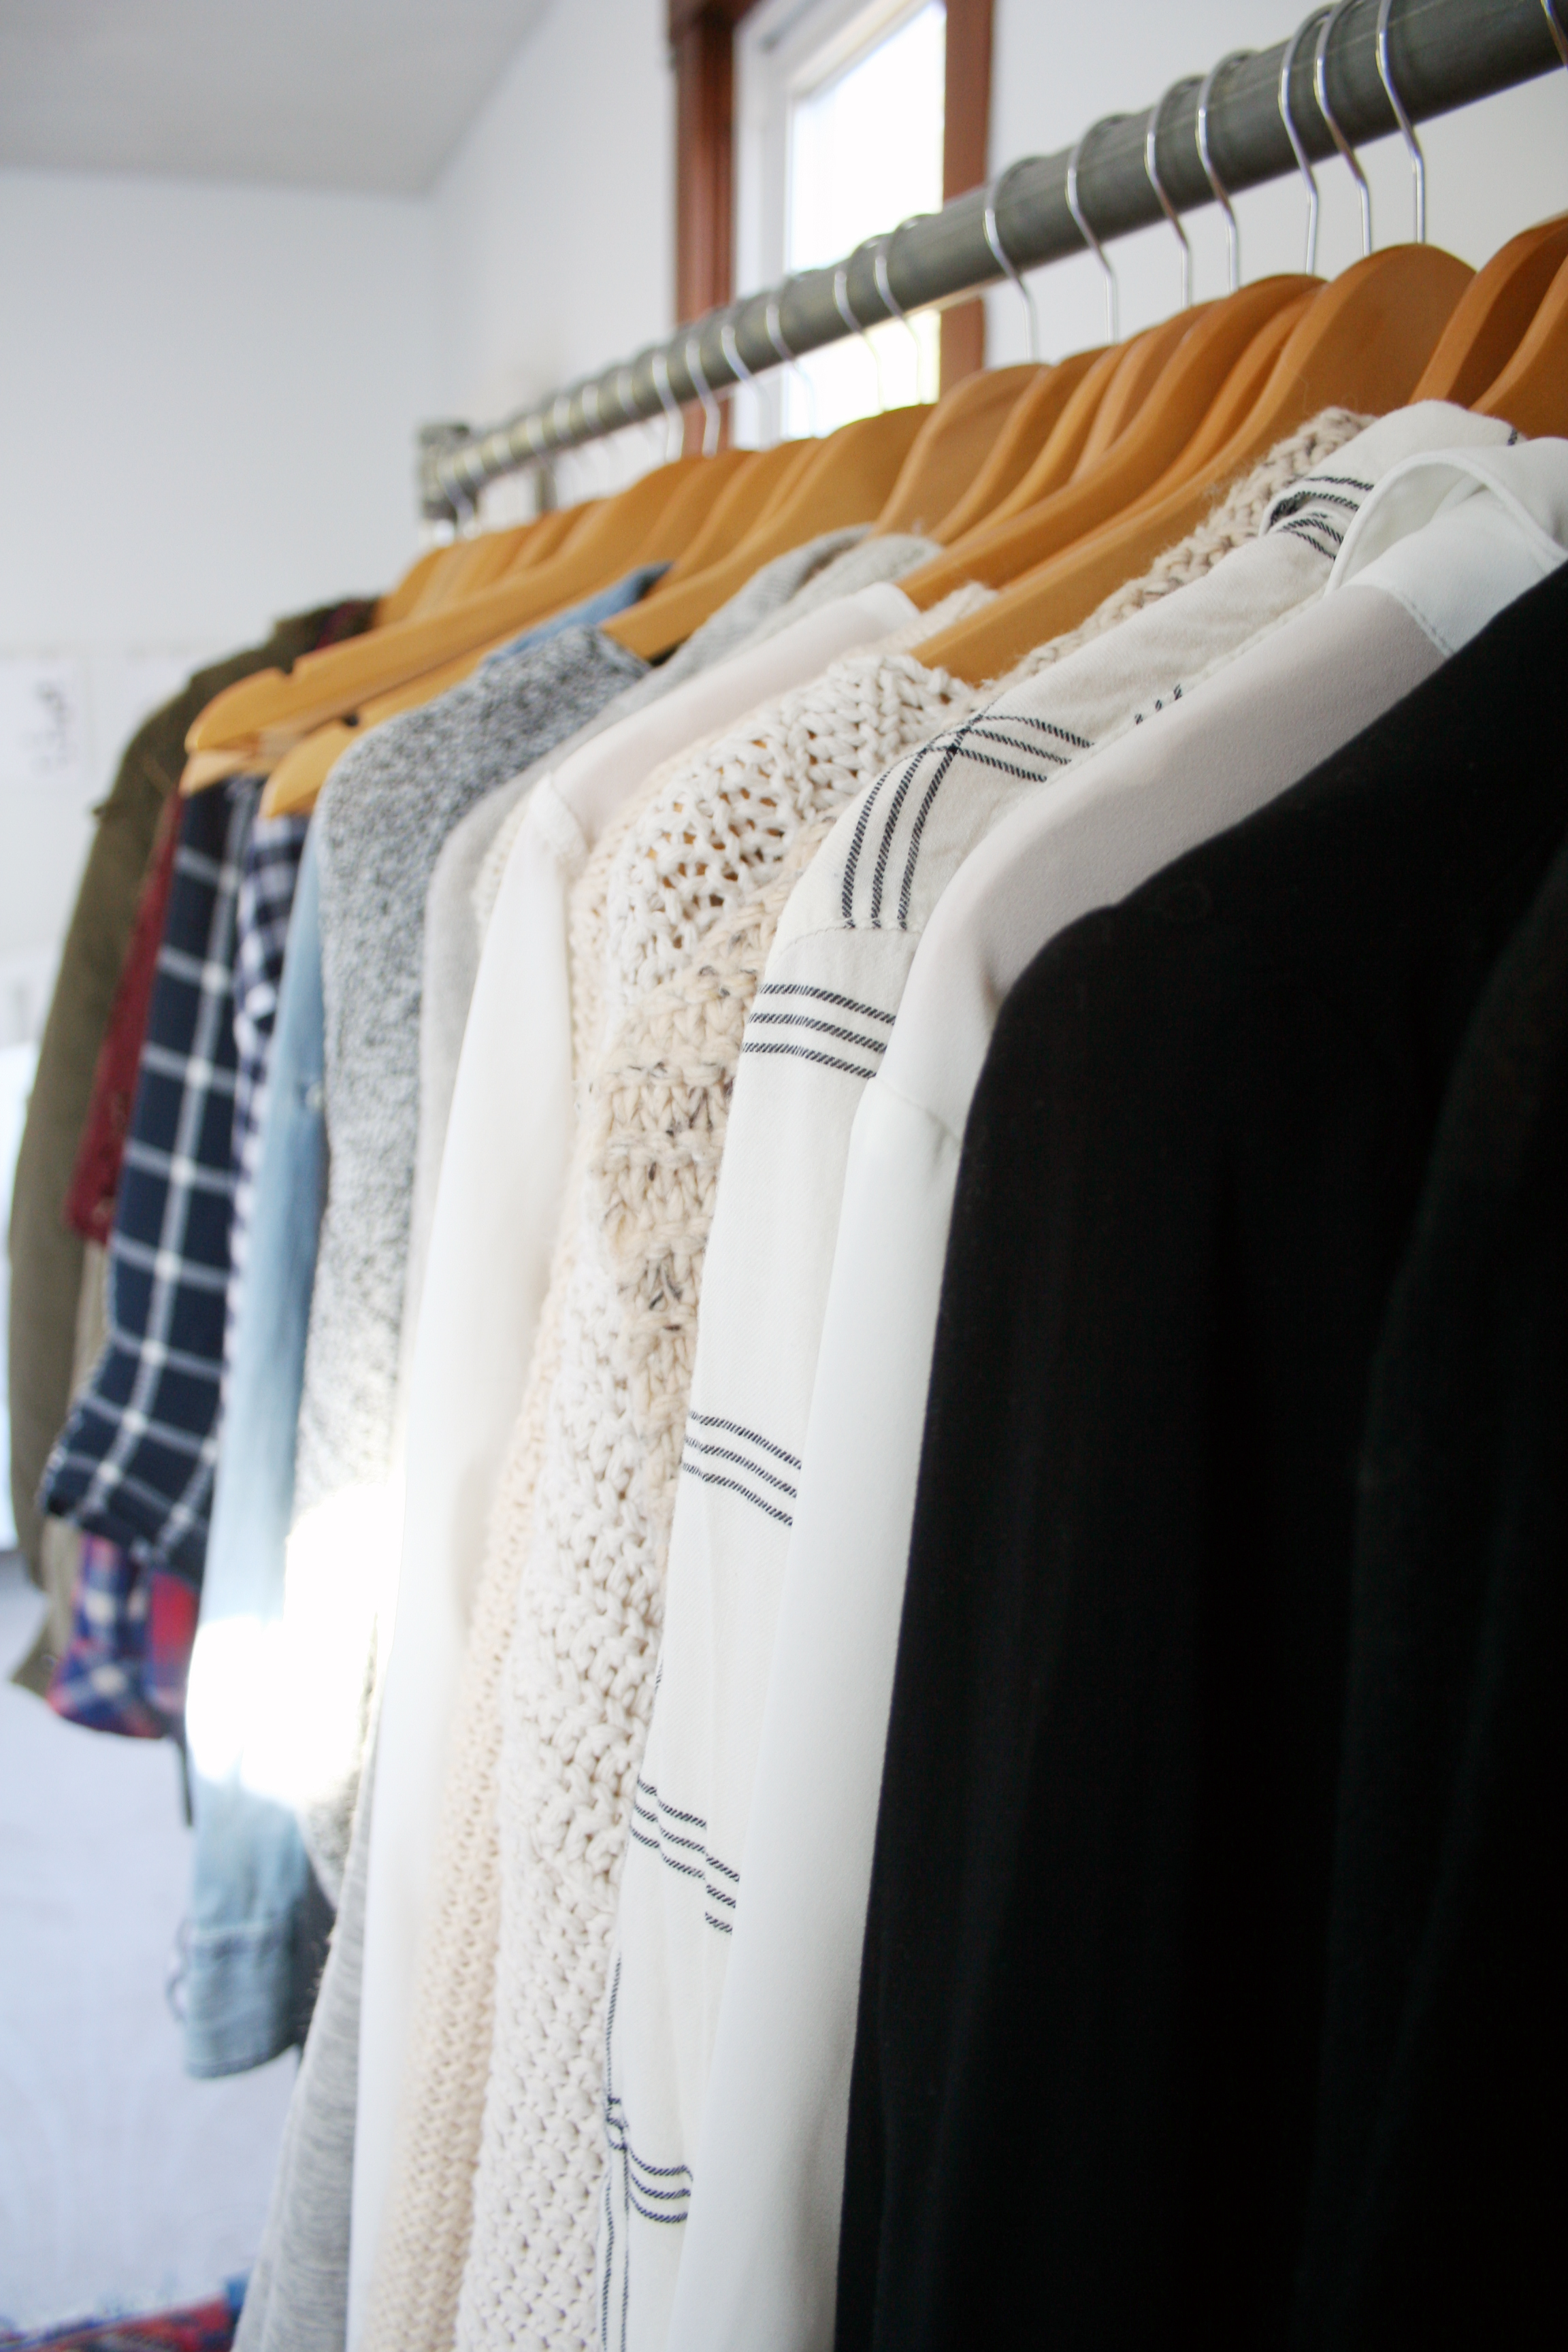 My Capsule Wardrobe / Winter 2015 + What's Working and What's Not